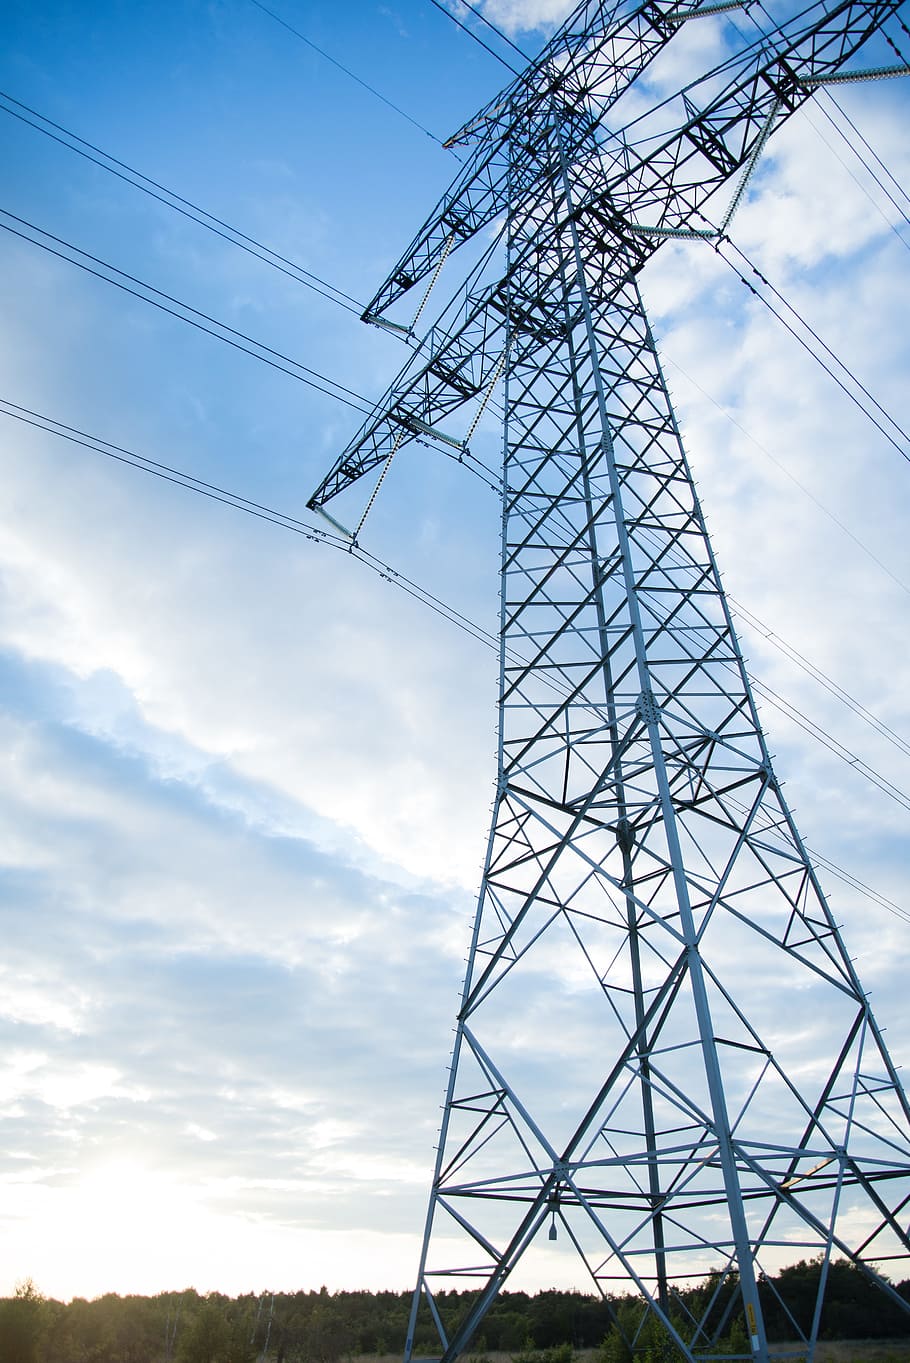 Gray Transmission Line Under Blue Sky at Daytime, cable, clouds